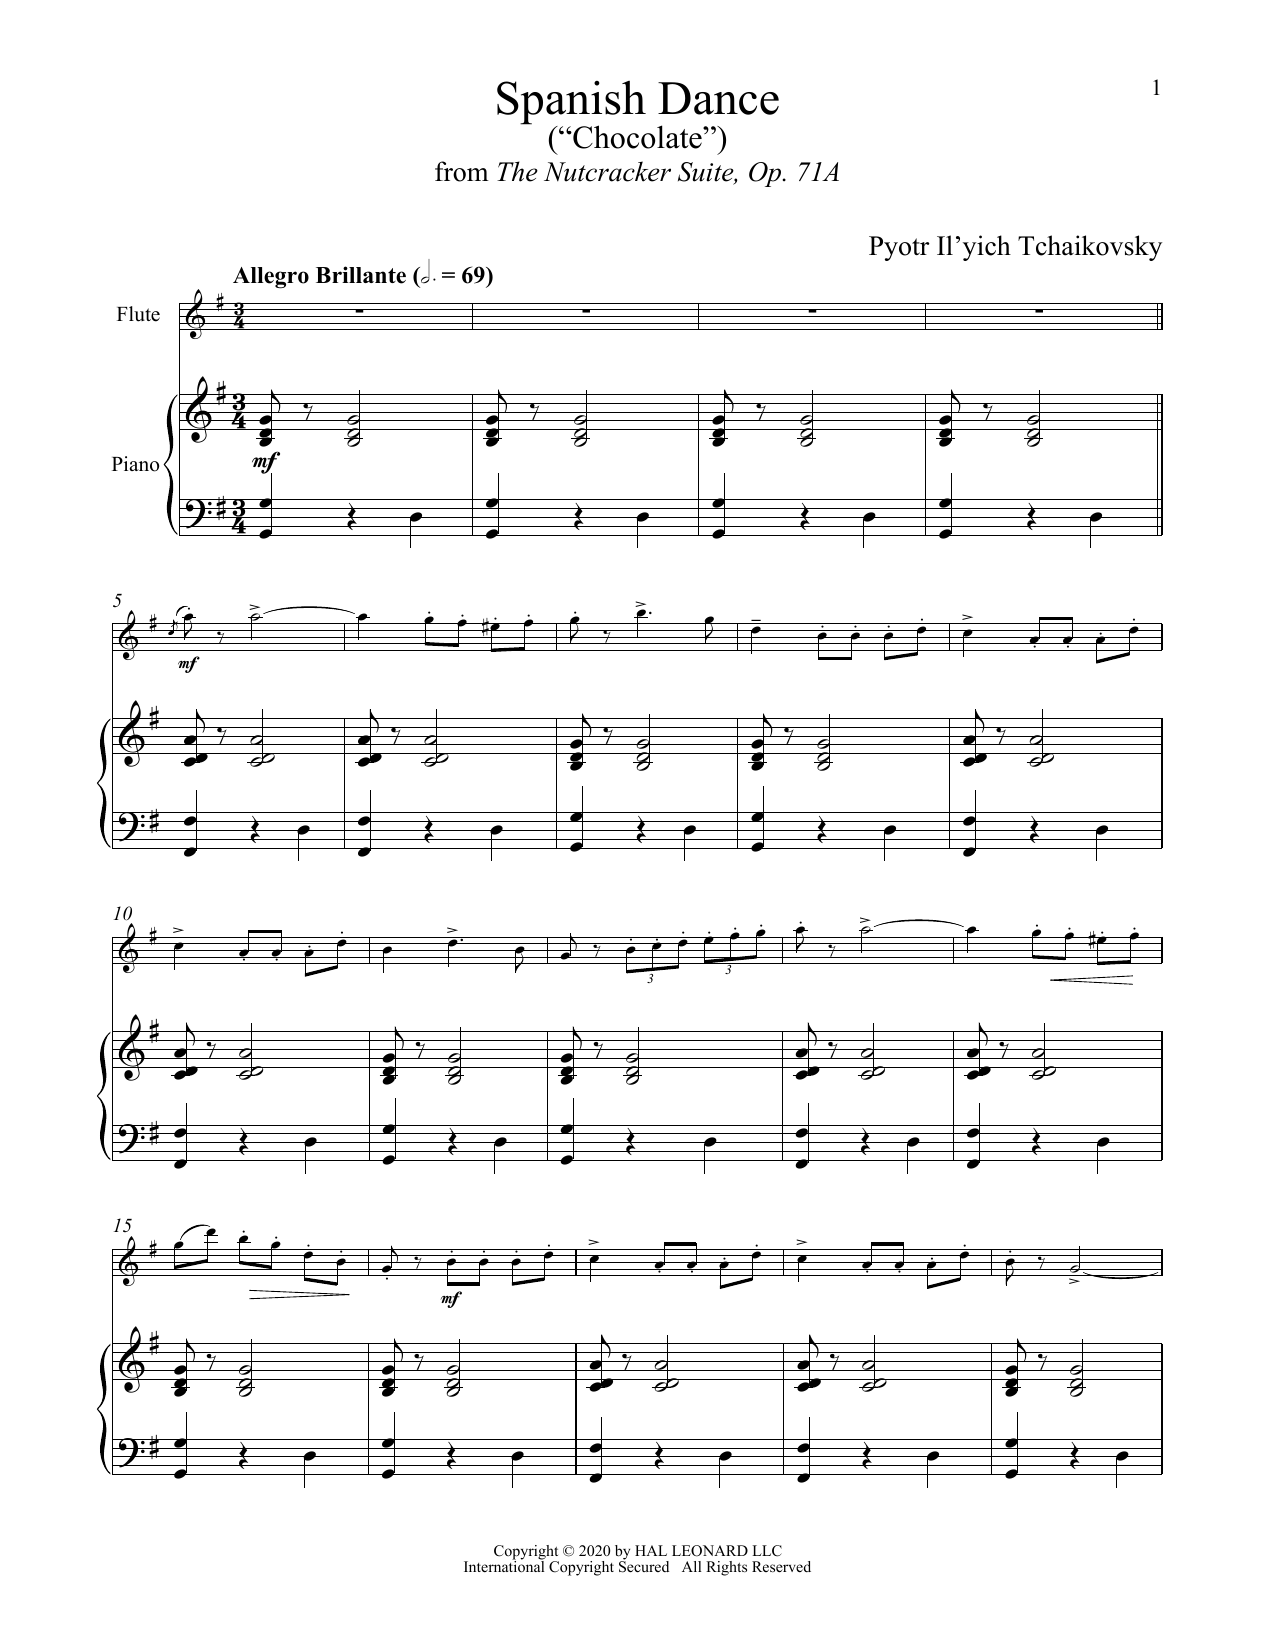 Download Pyotr Il'yich Tchaikovsky Spanish Dance (from The Nutcracker) Sheet Music